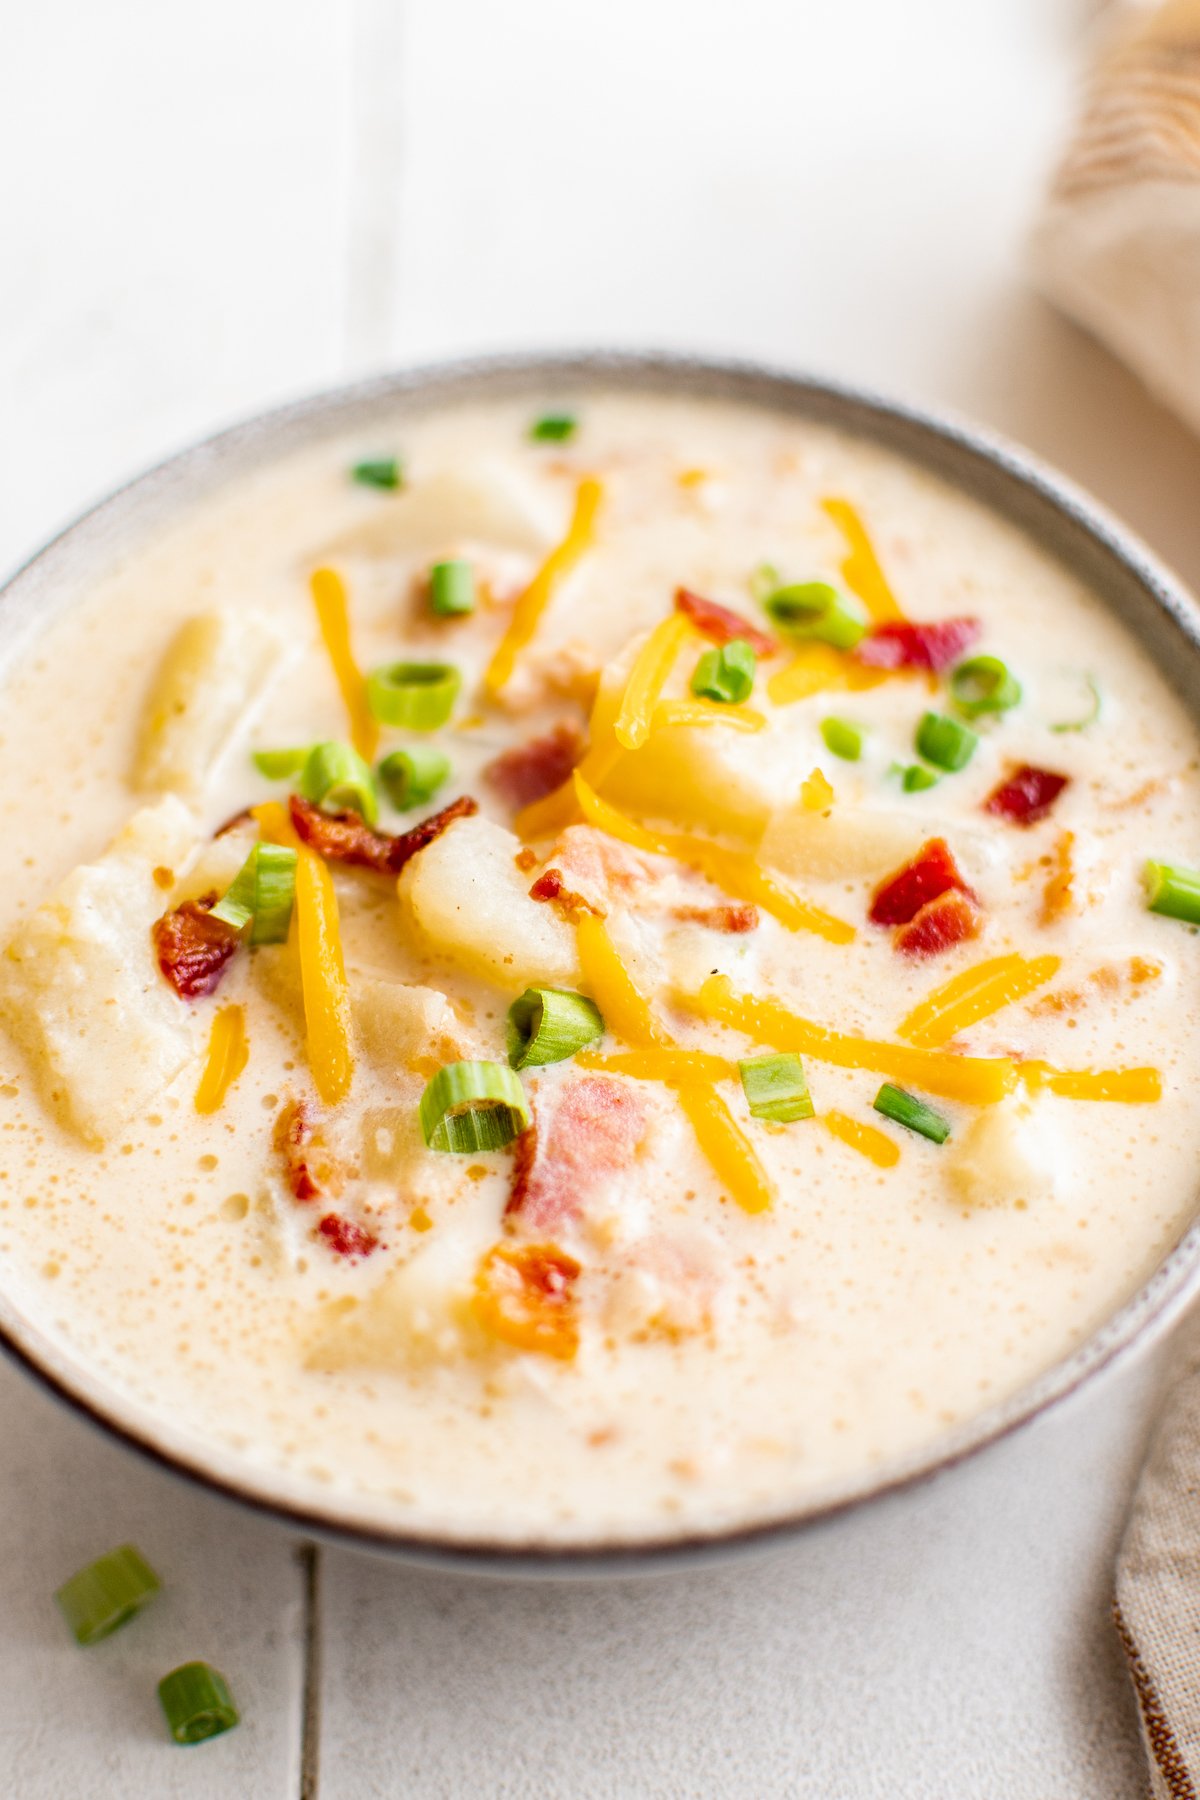 Cheddar cheese, bacon bits, and green onions sprinkled over a bowl of creamy baked potato soup.